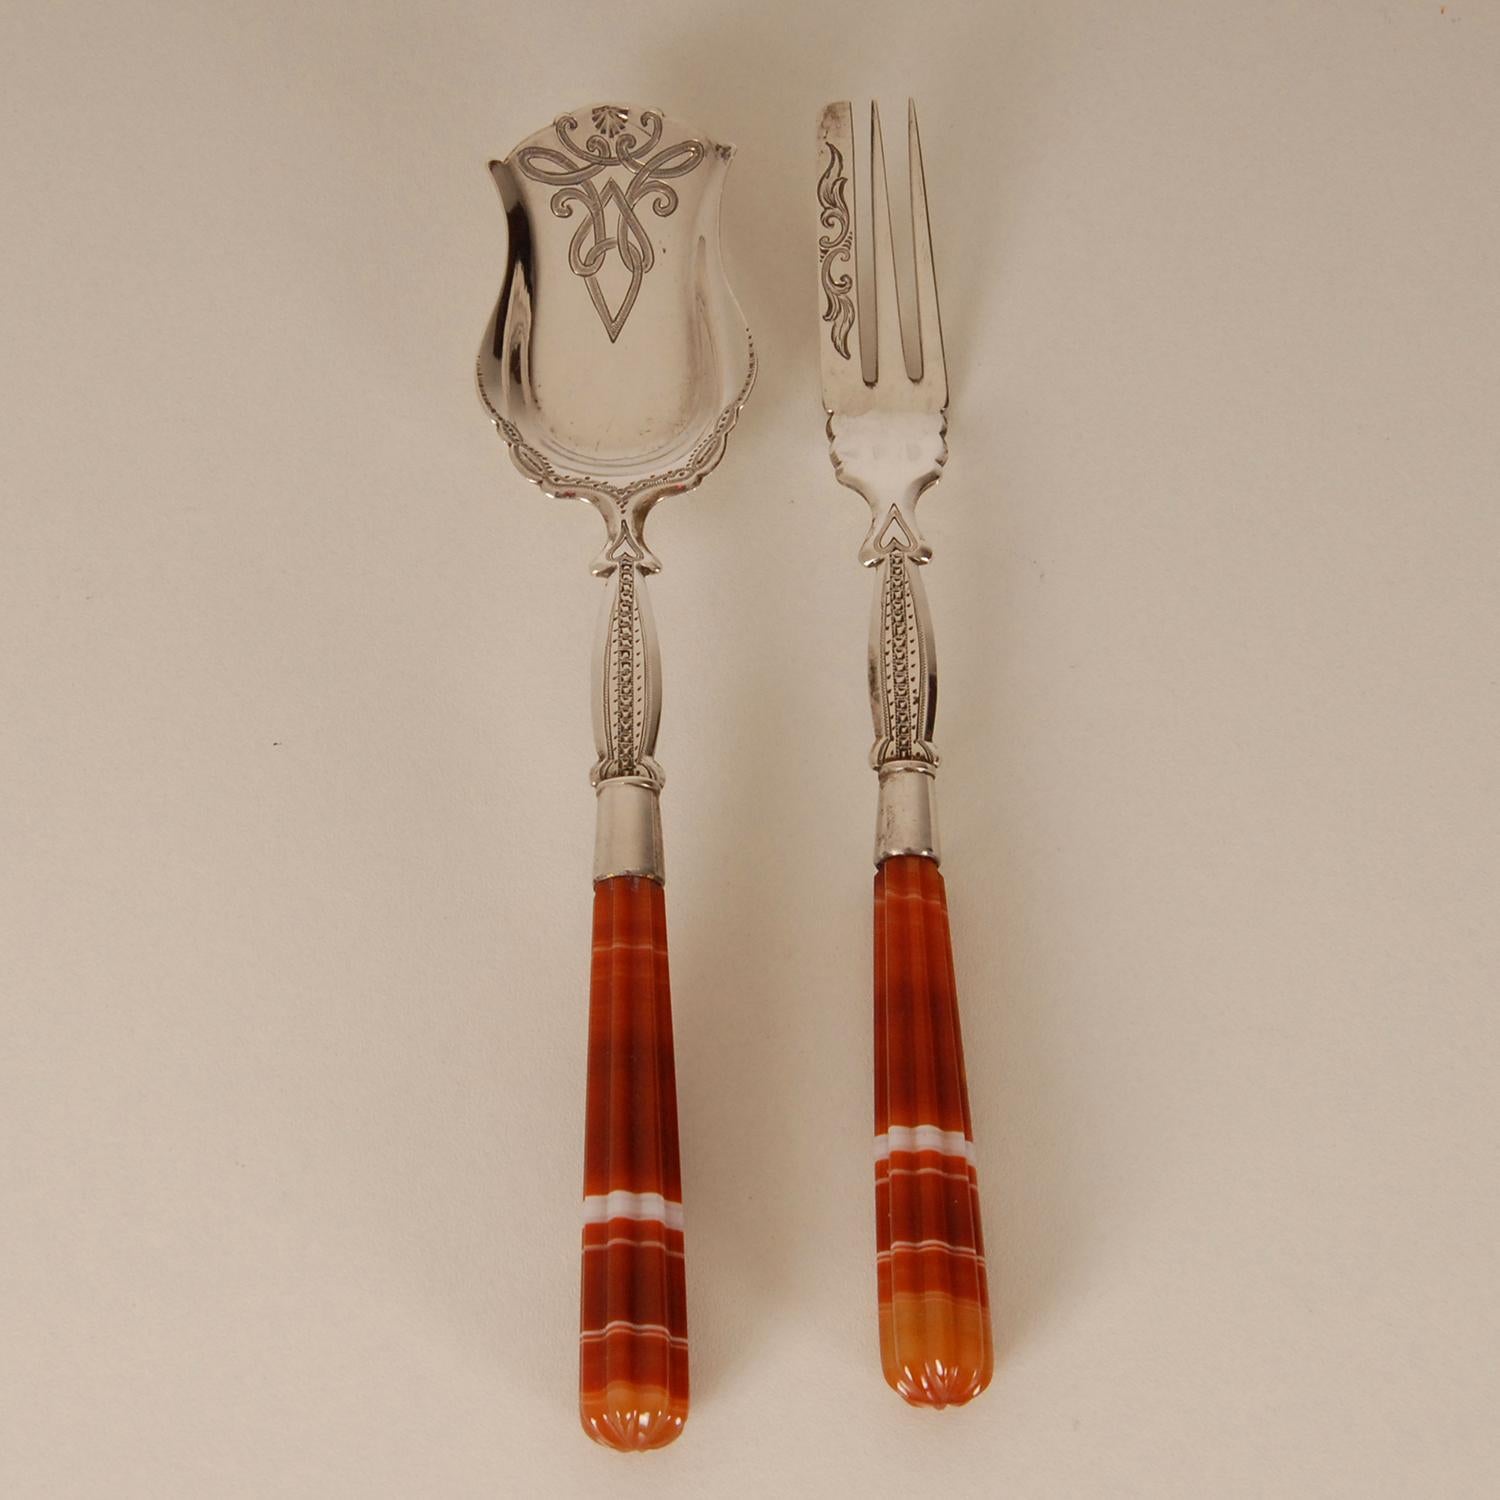 Antique sterling silver & Agate serving set.
Fabulous floral engravings on the fork and spoon.
Handles made of ribbed agate
Condition good.
Fully hallmarked.
Year letter 1899
Silver has a long history. In addition to utensils, they are also